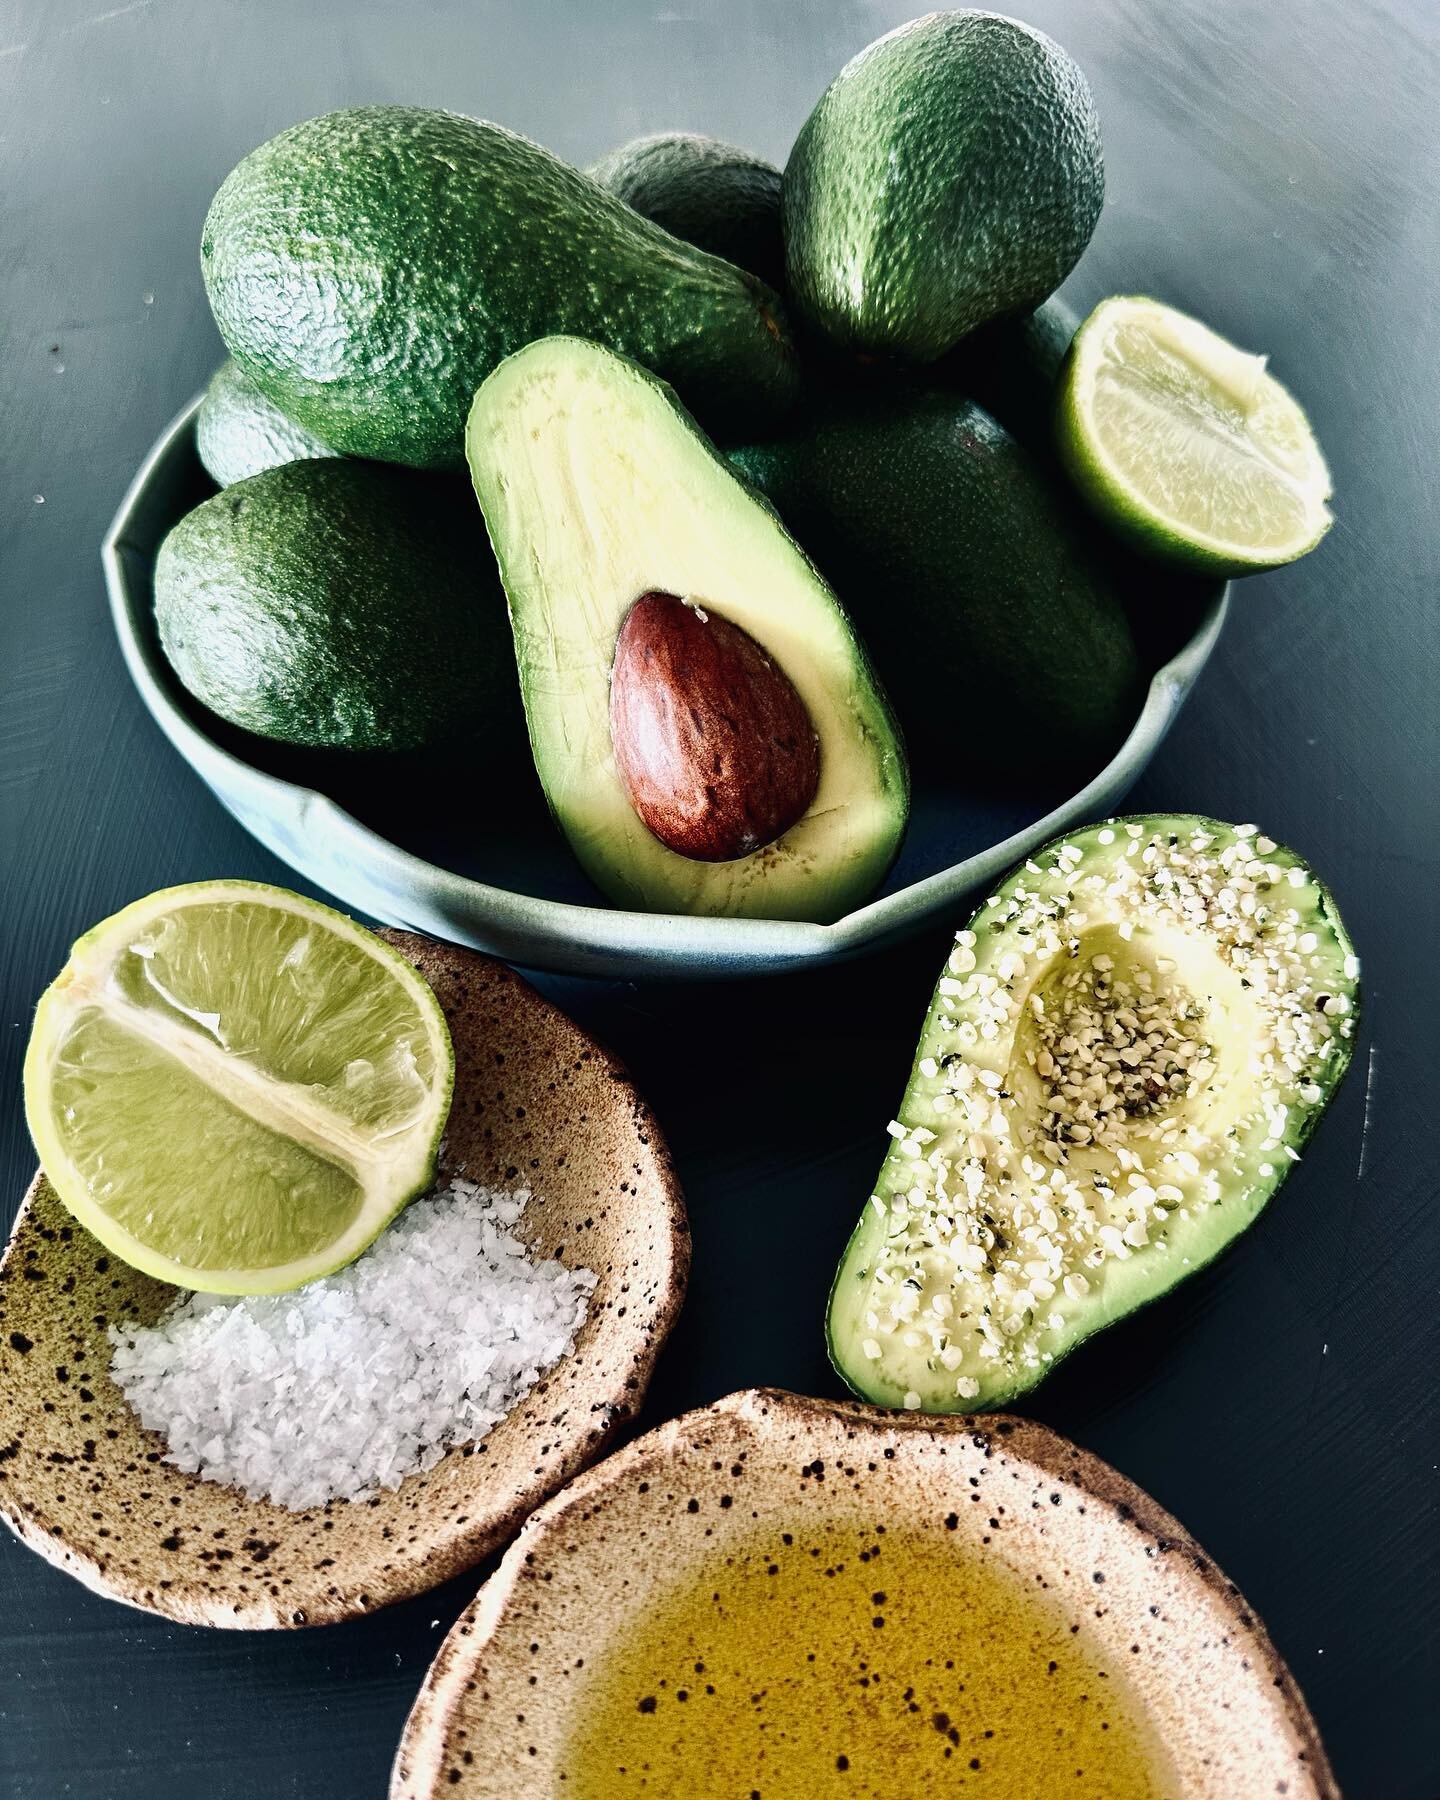 🥑🥑🥑 Hooray for the Alligator Pear

With the sheer volume and variability of information available in relation to nutrition, it can be incredibly difficult to decide on what is a &lsquo;healthy diet&rsquo; for you and your unique situation. 

Most 